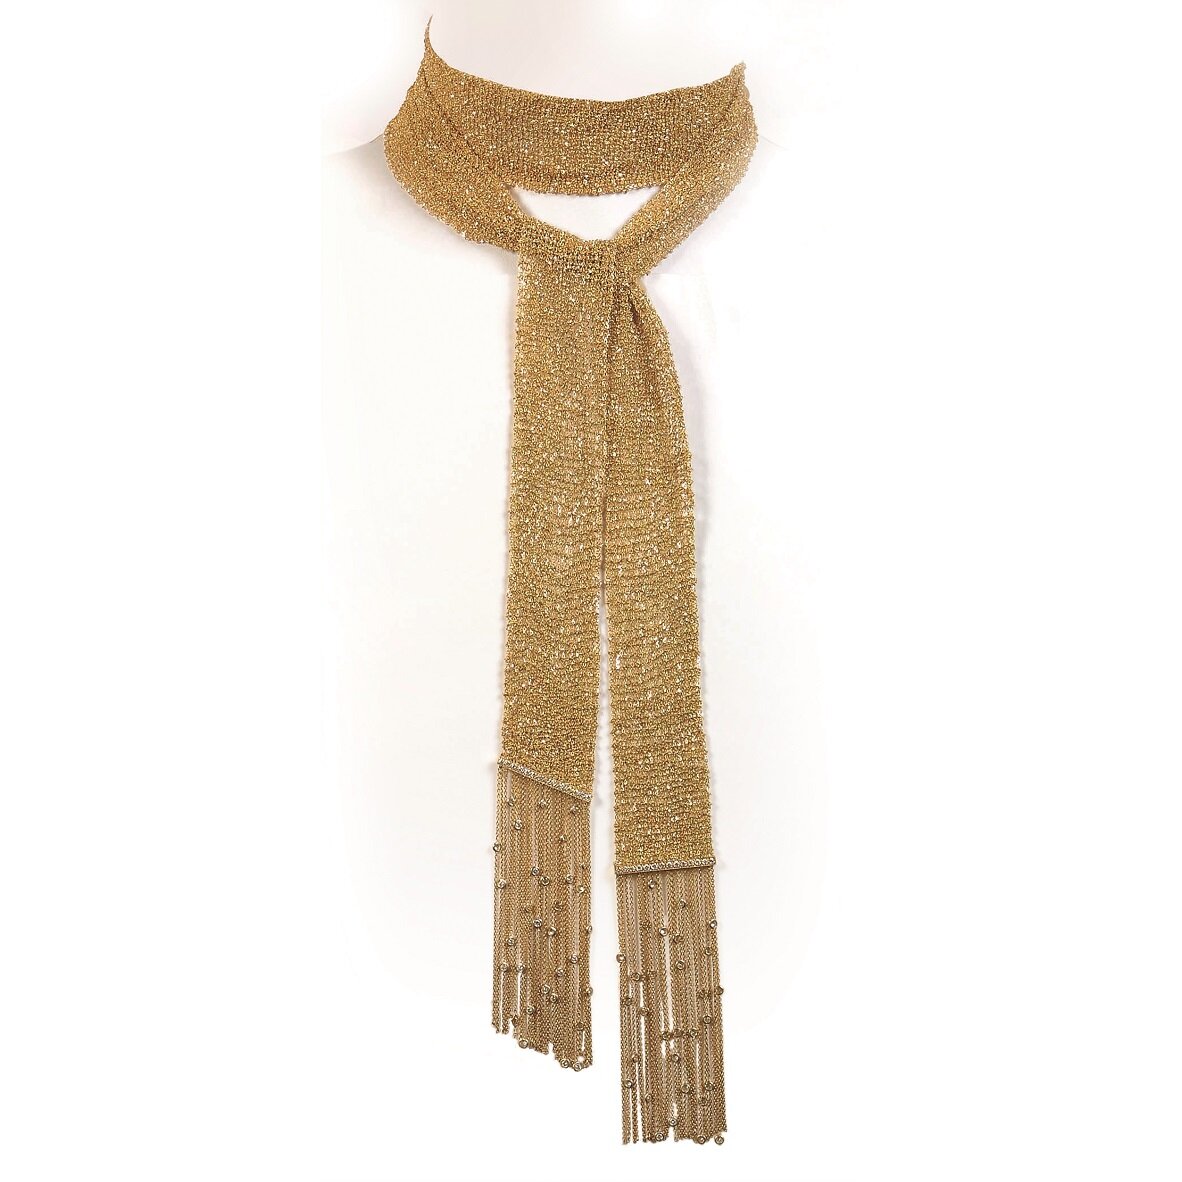 Delilah woven scarf in yellow gold and diamonds.jpg